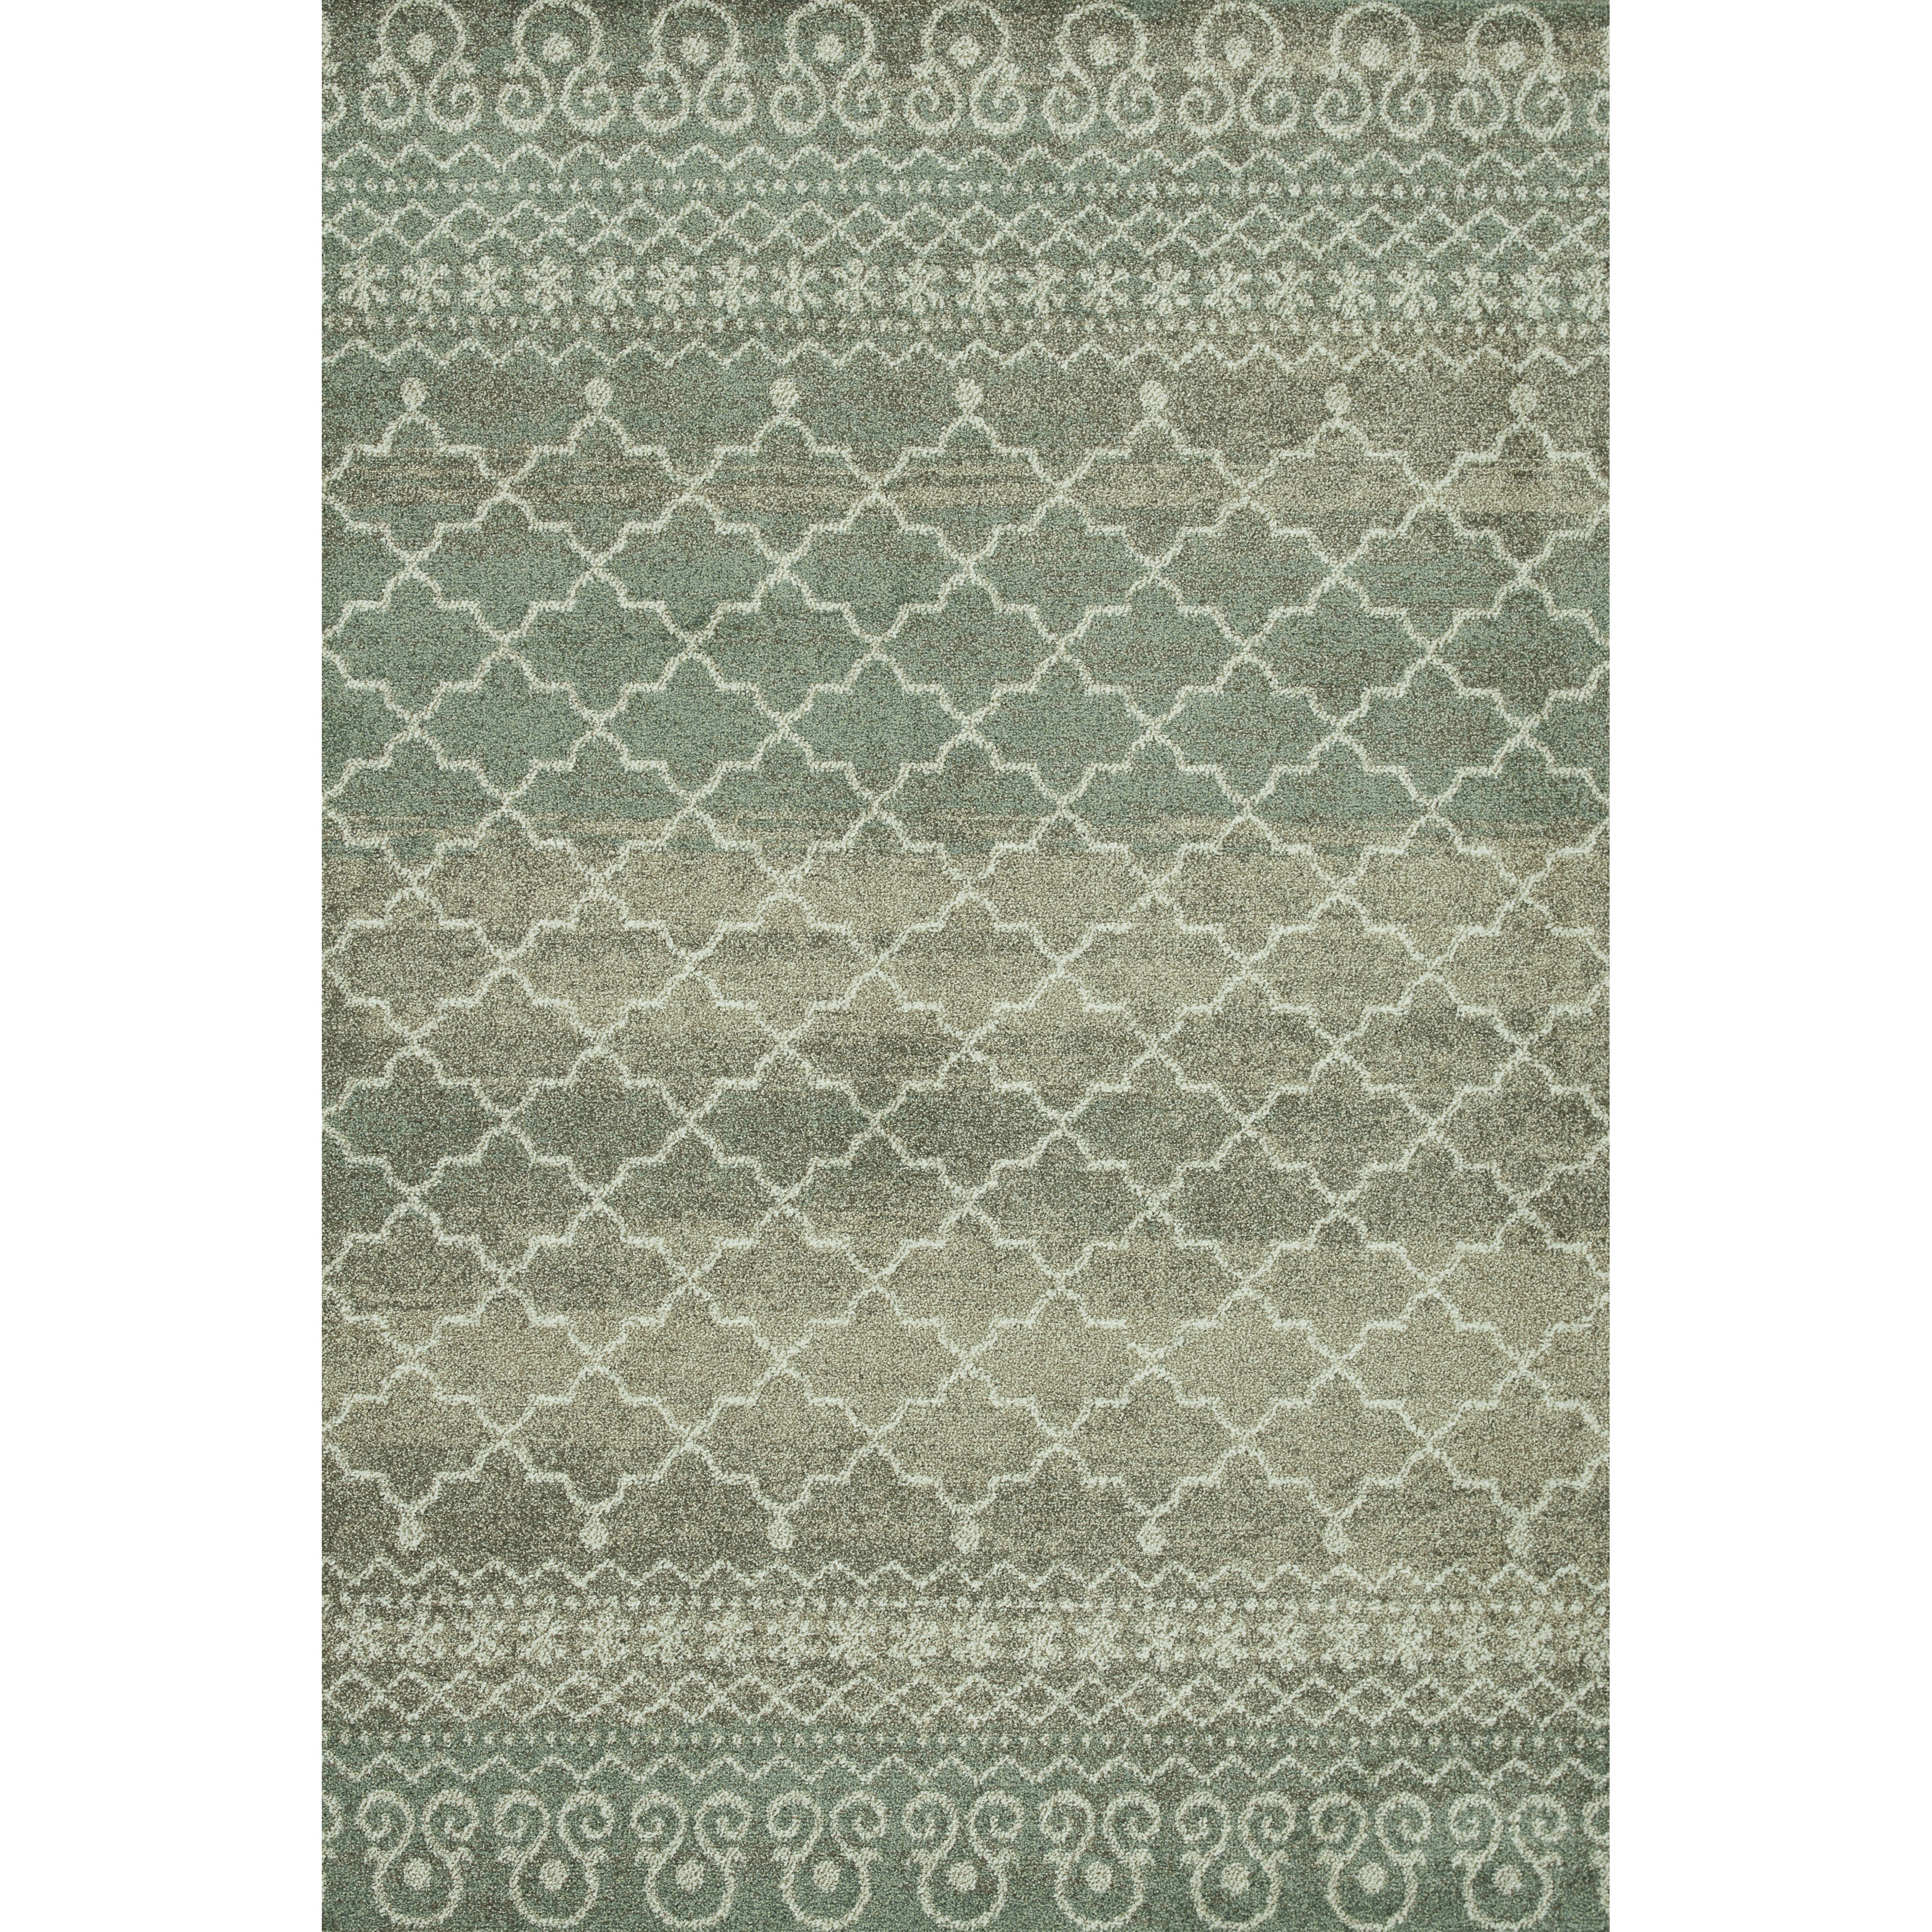 Lavern Sea/ Taupe Rug (52 x 77) Today $162.73 Sale $146.46 Save